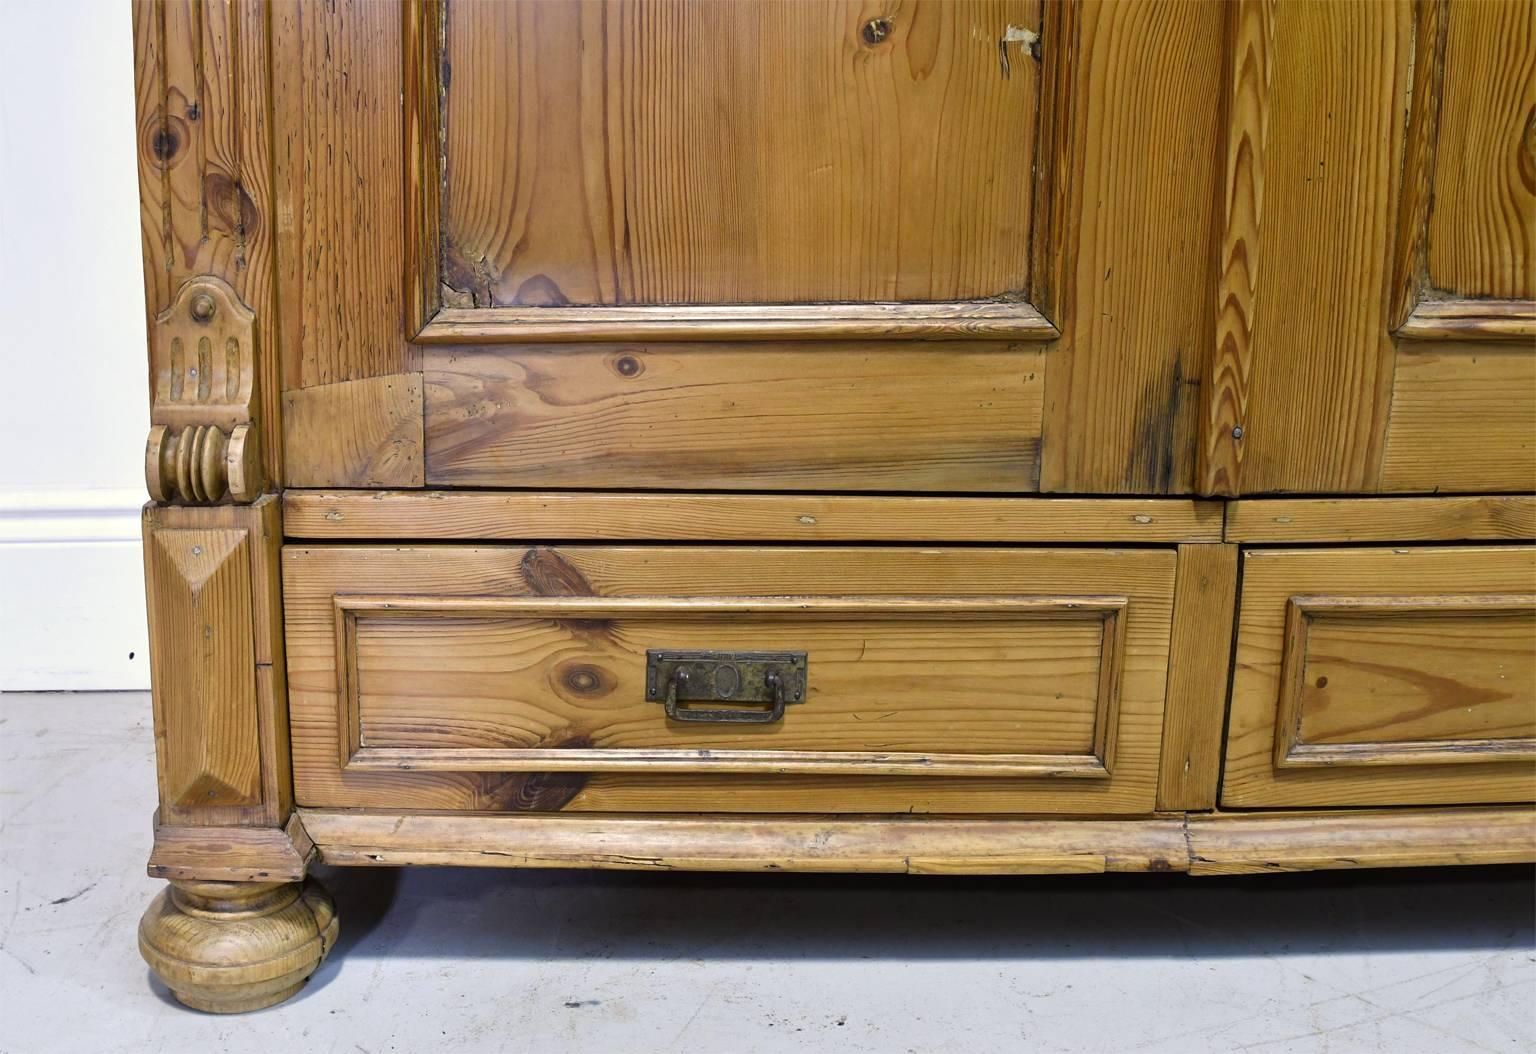 German 19th Century Two-Door European Armoire in Pine with Two Drawers and Shelves